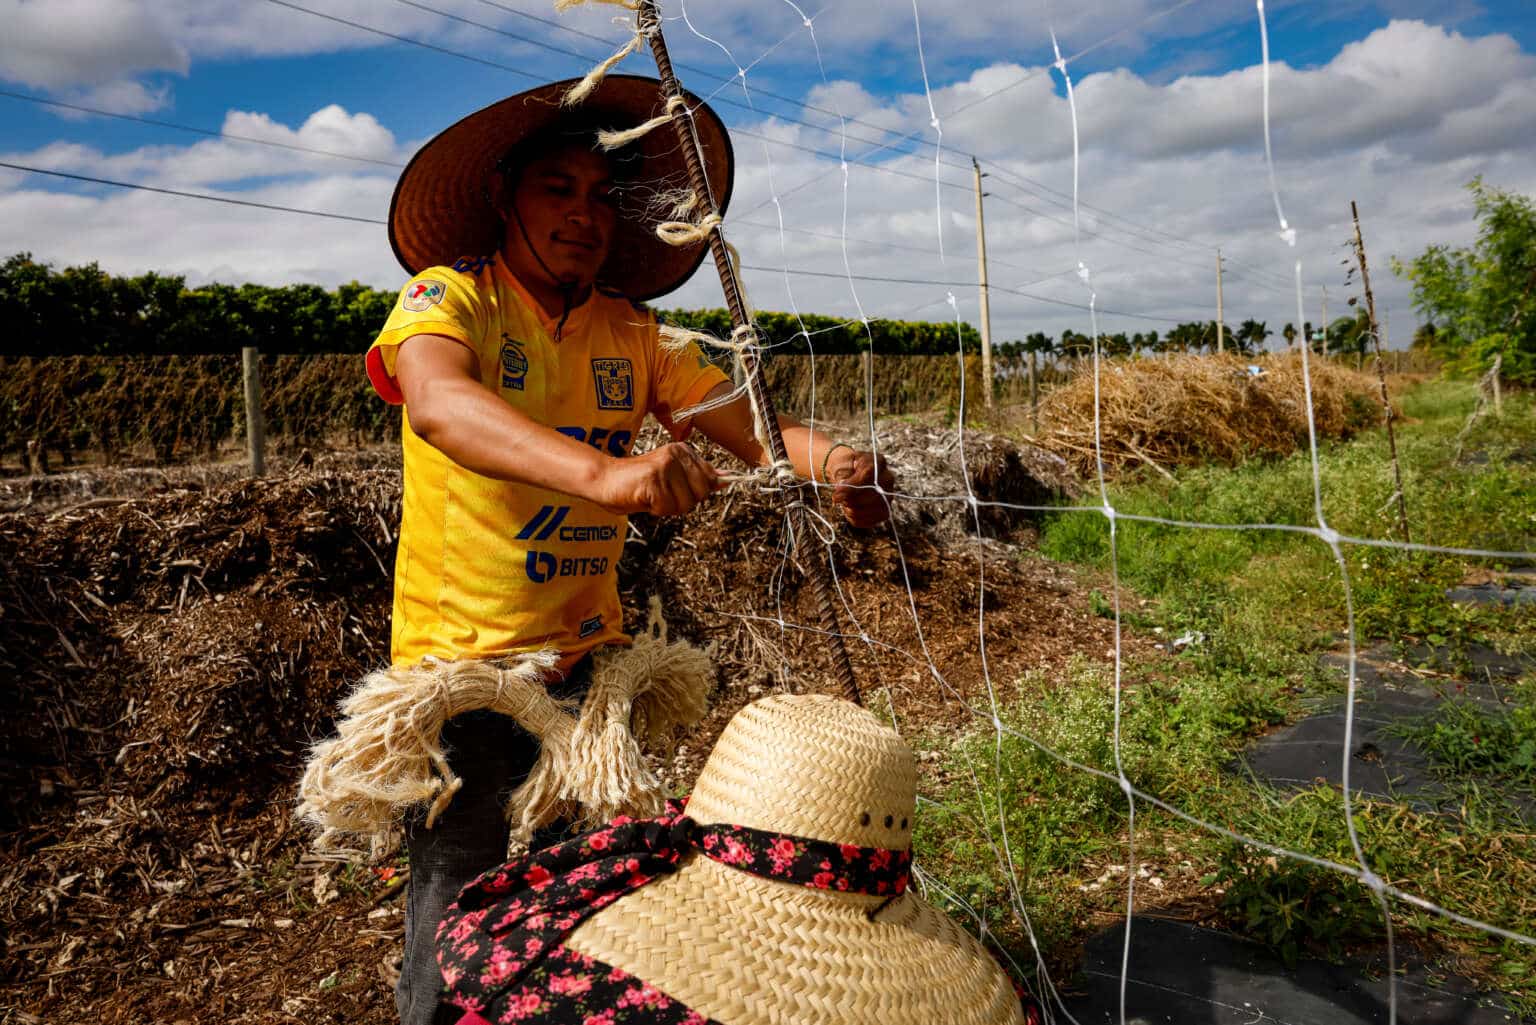 Farm workers set up a mesh to grow vegetables